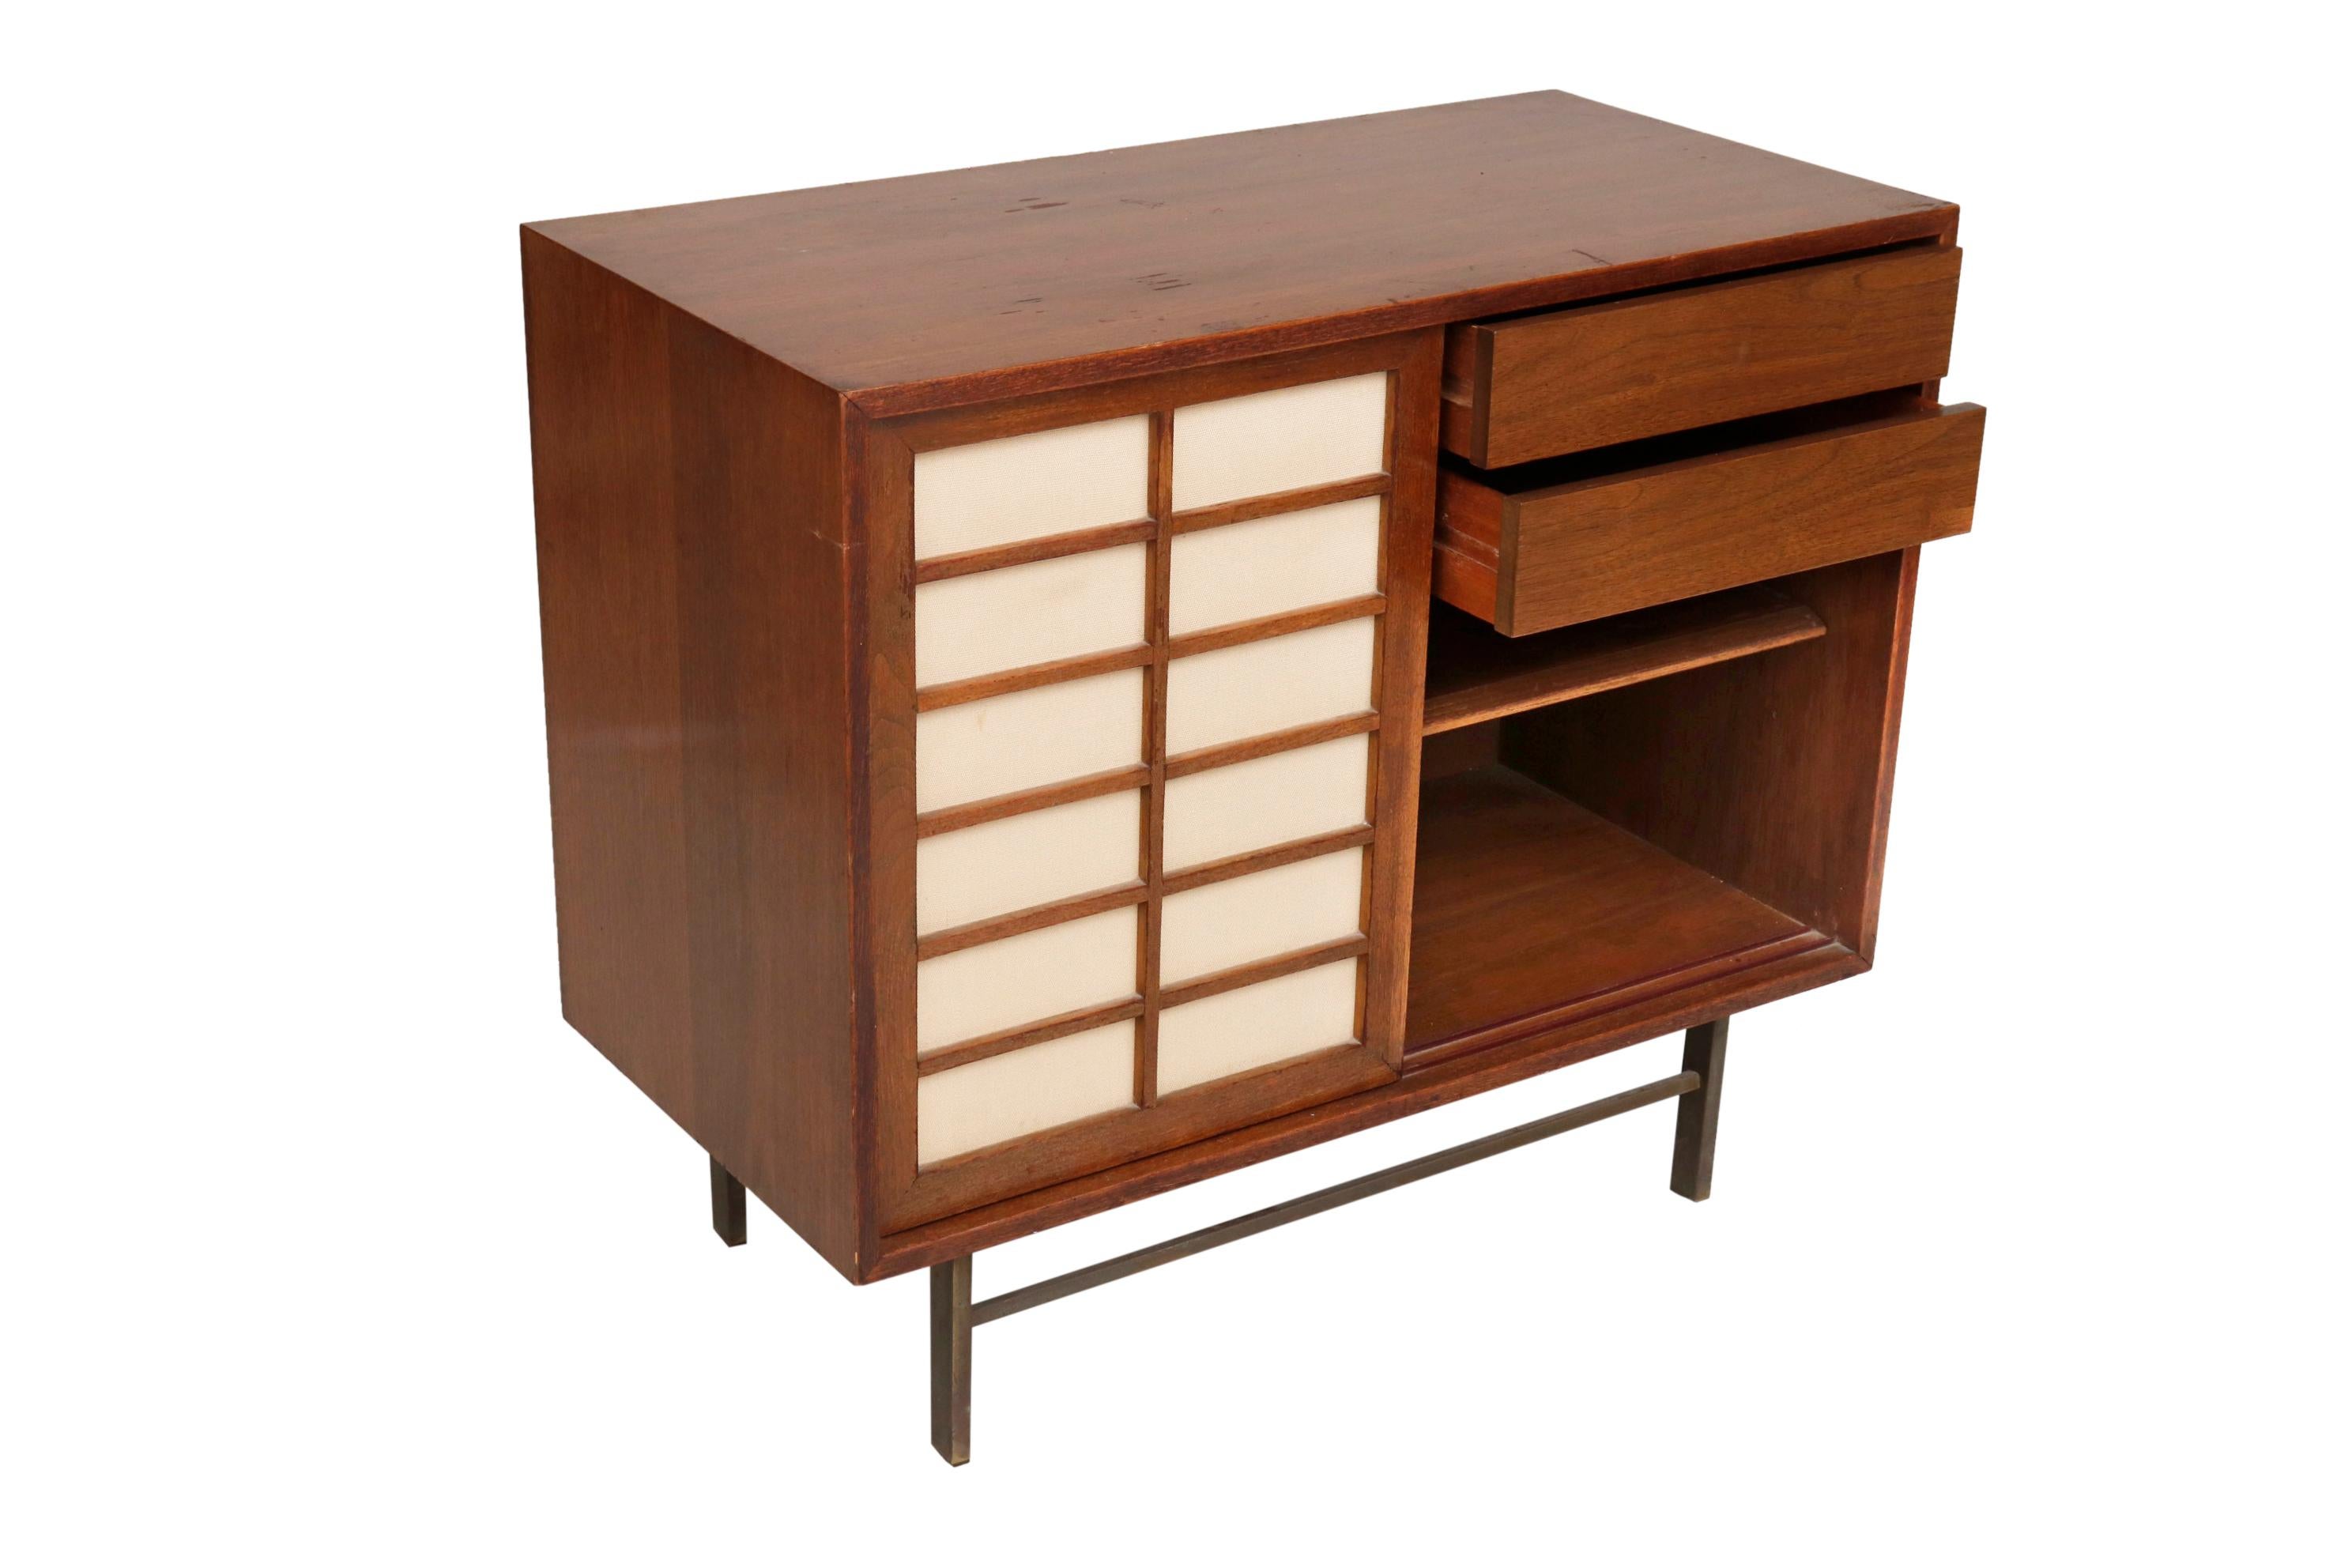 Hand-Crafted Midcentury Cabinet, Compact Size